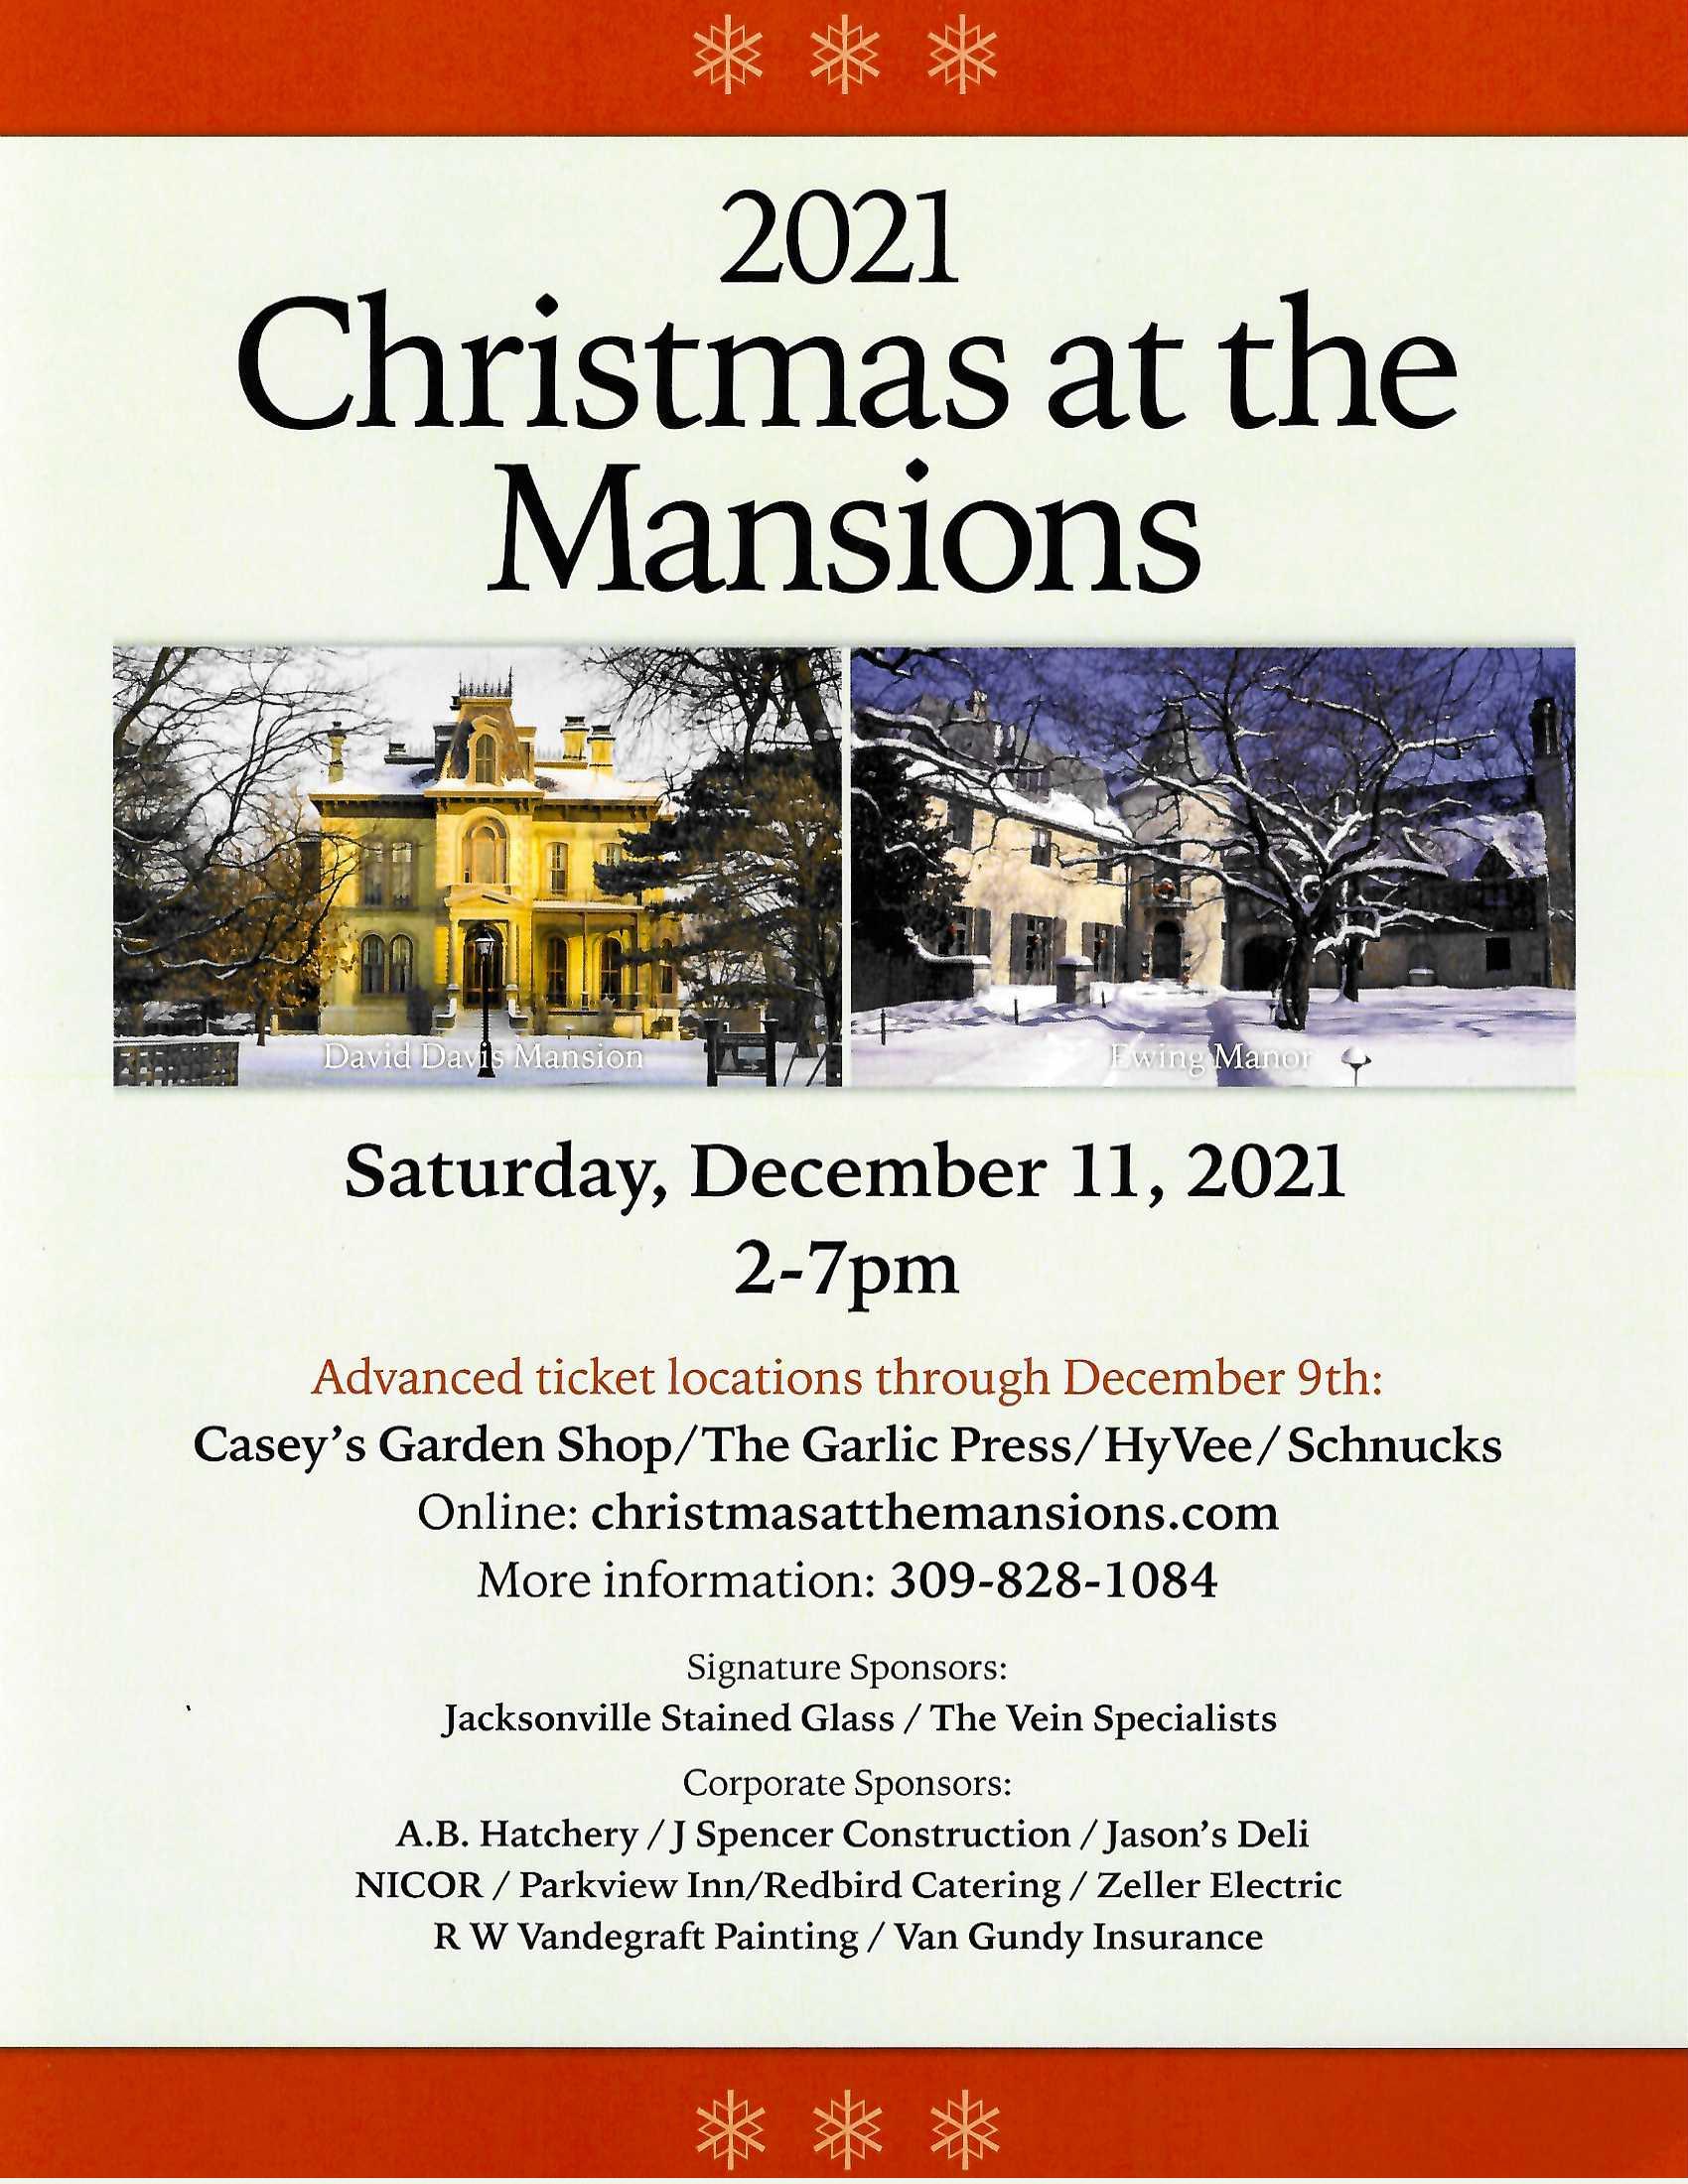 Christmas at the Mansions Tour